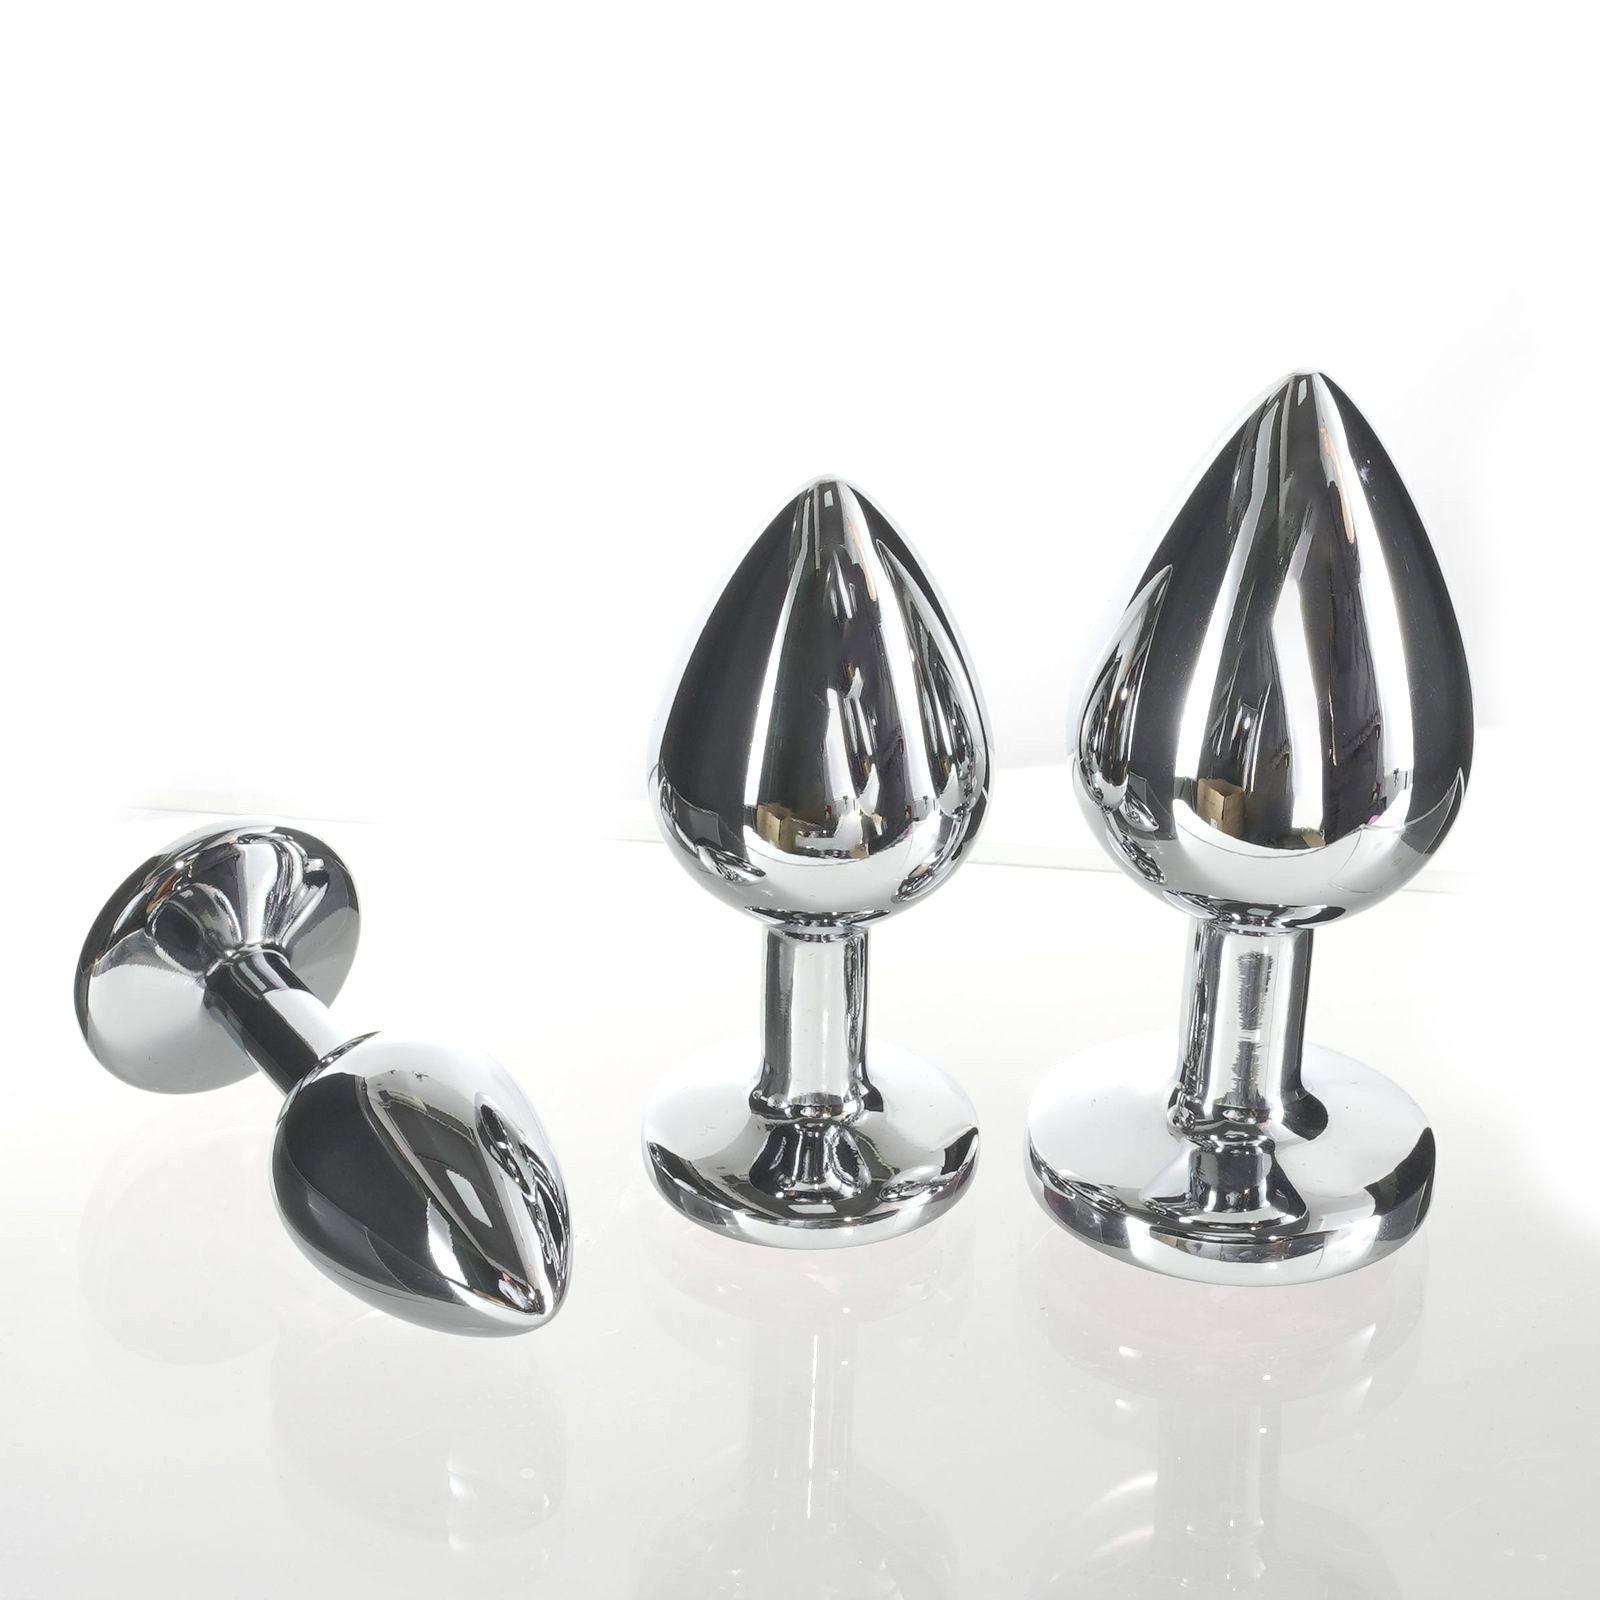 Easy In/out Luxury Jewelry Design Fetish Stainless Steel Anal Butt Plug G Spot Anal Beads Sex Toys For Men Women Gay Lesbian